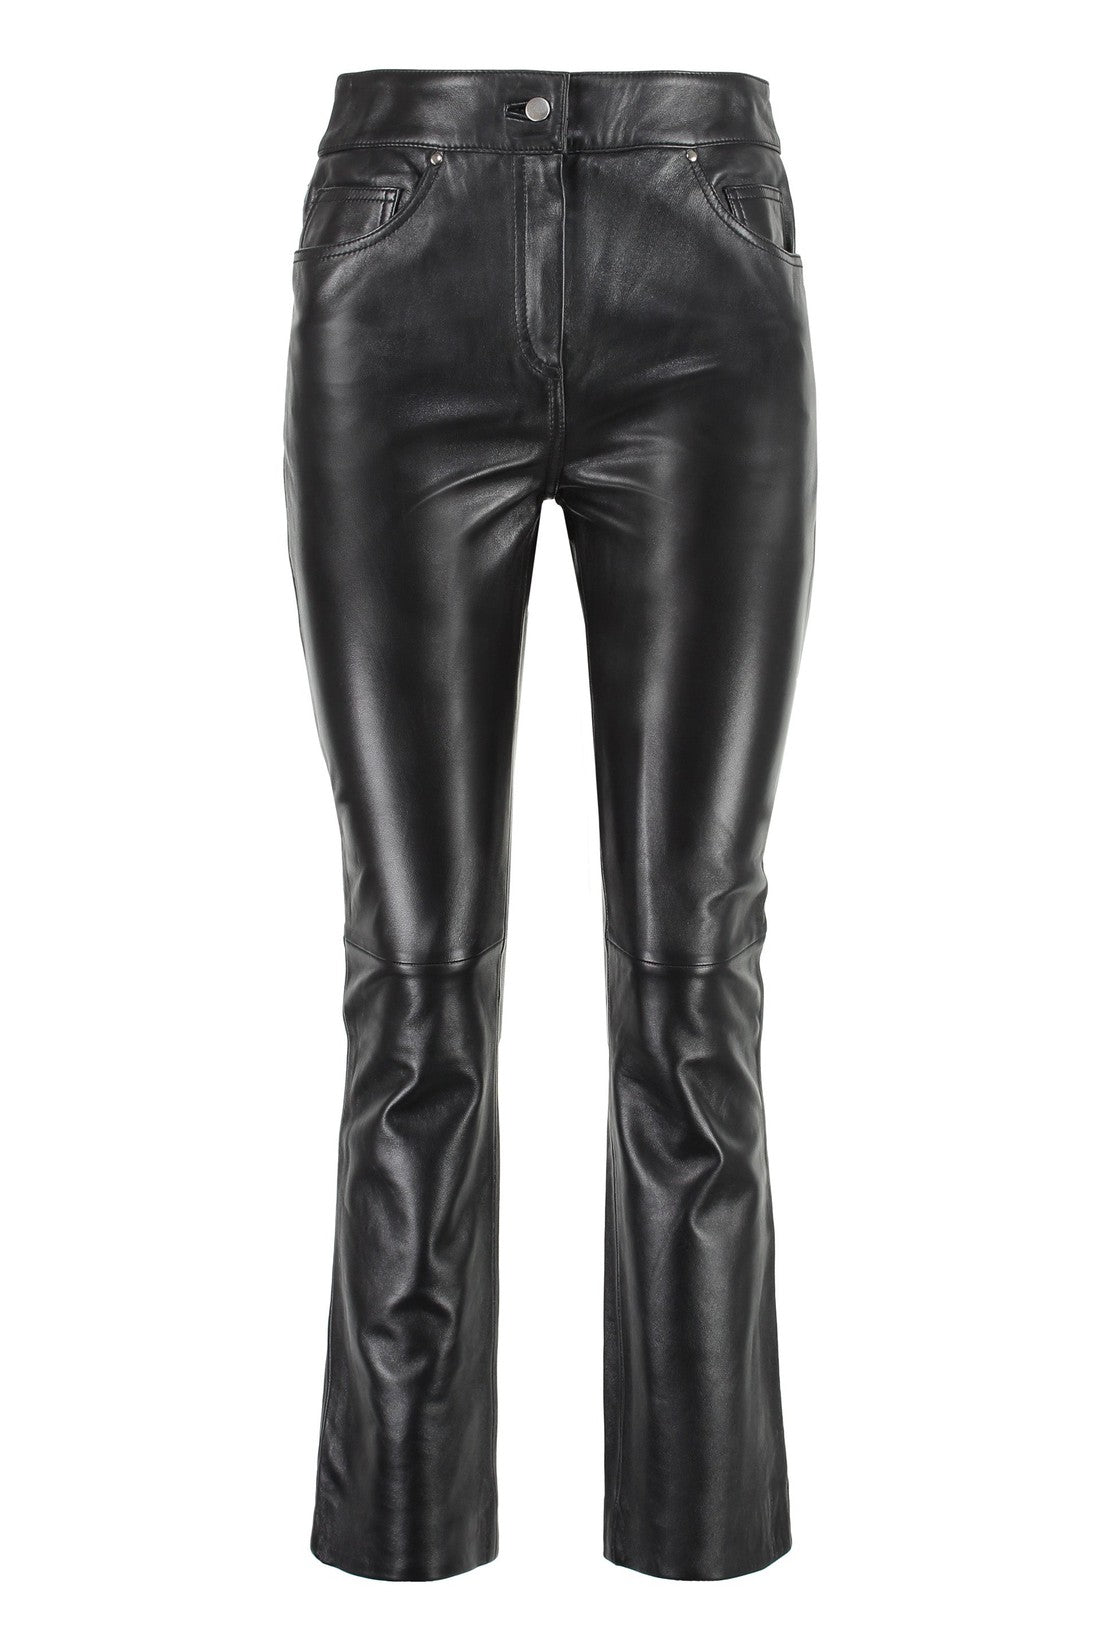 Stand Studio-OUTLET-SALE-Avery leather pants-ARCHIVIST